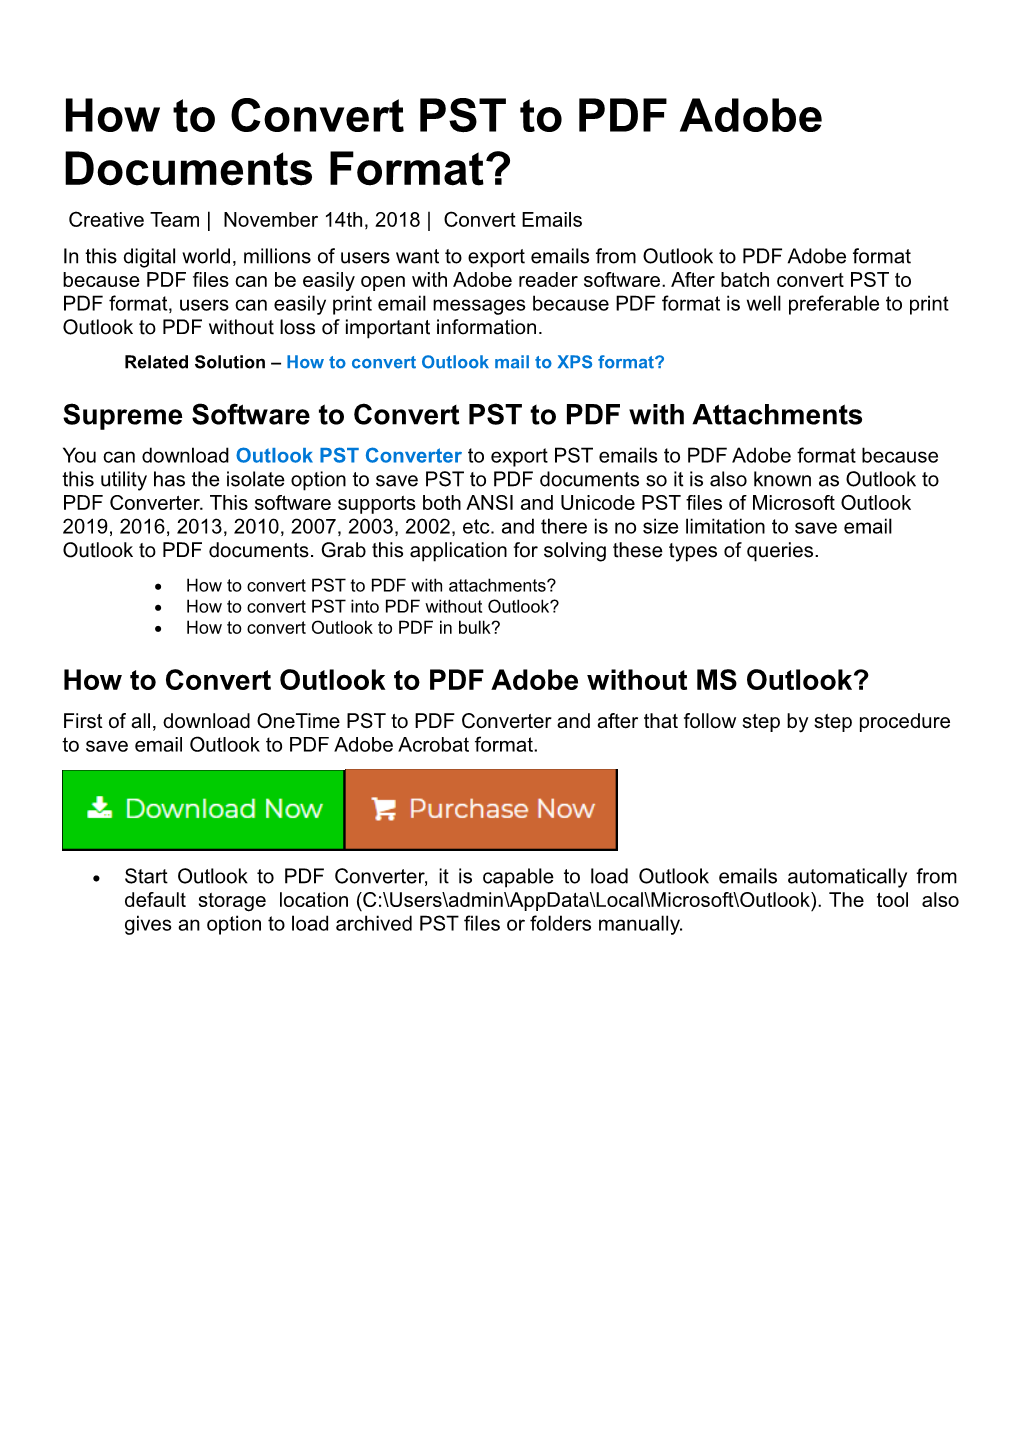 How to Convert PST to PDF Adobe Documents Format?